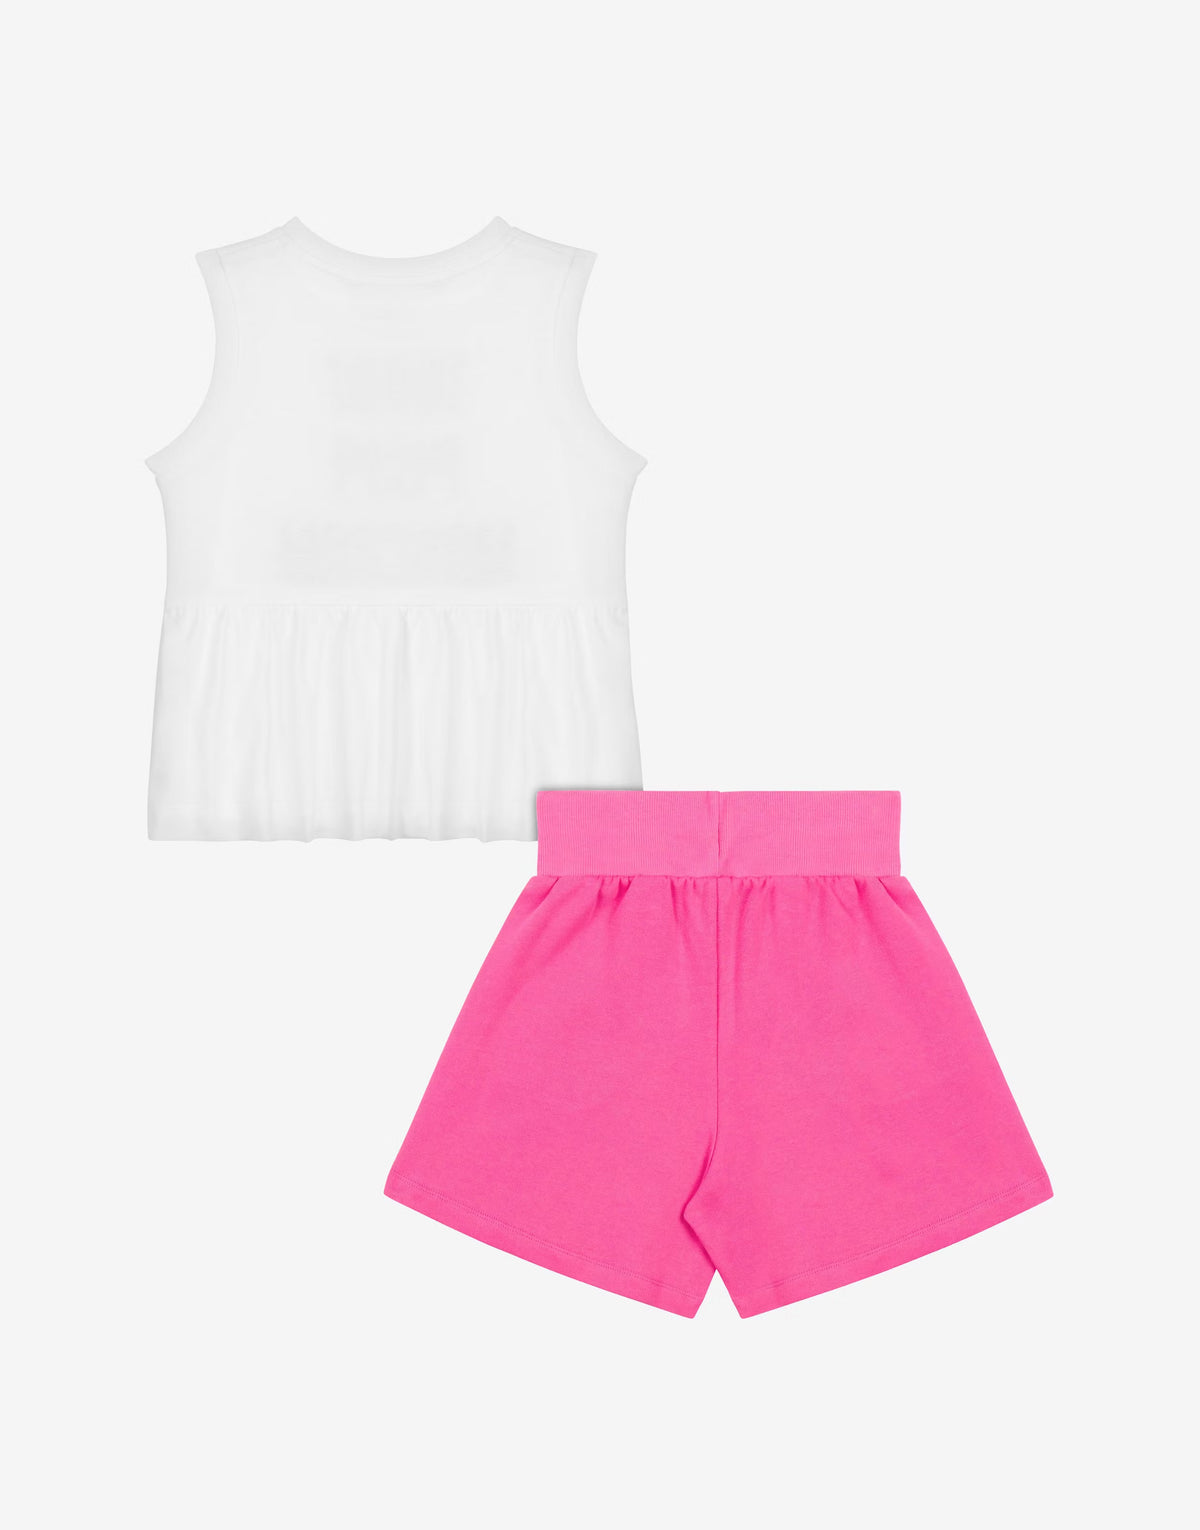 100% PURE MOSCHINO TOP AND SHORTS CO-ORD SET